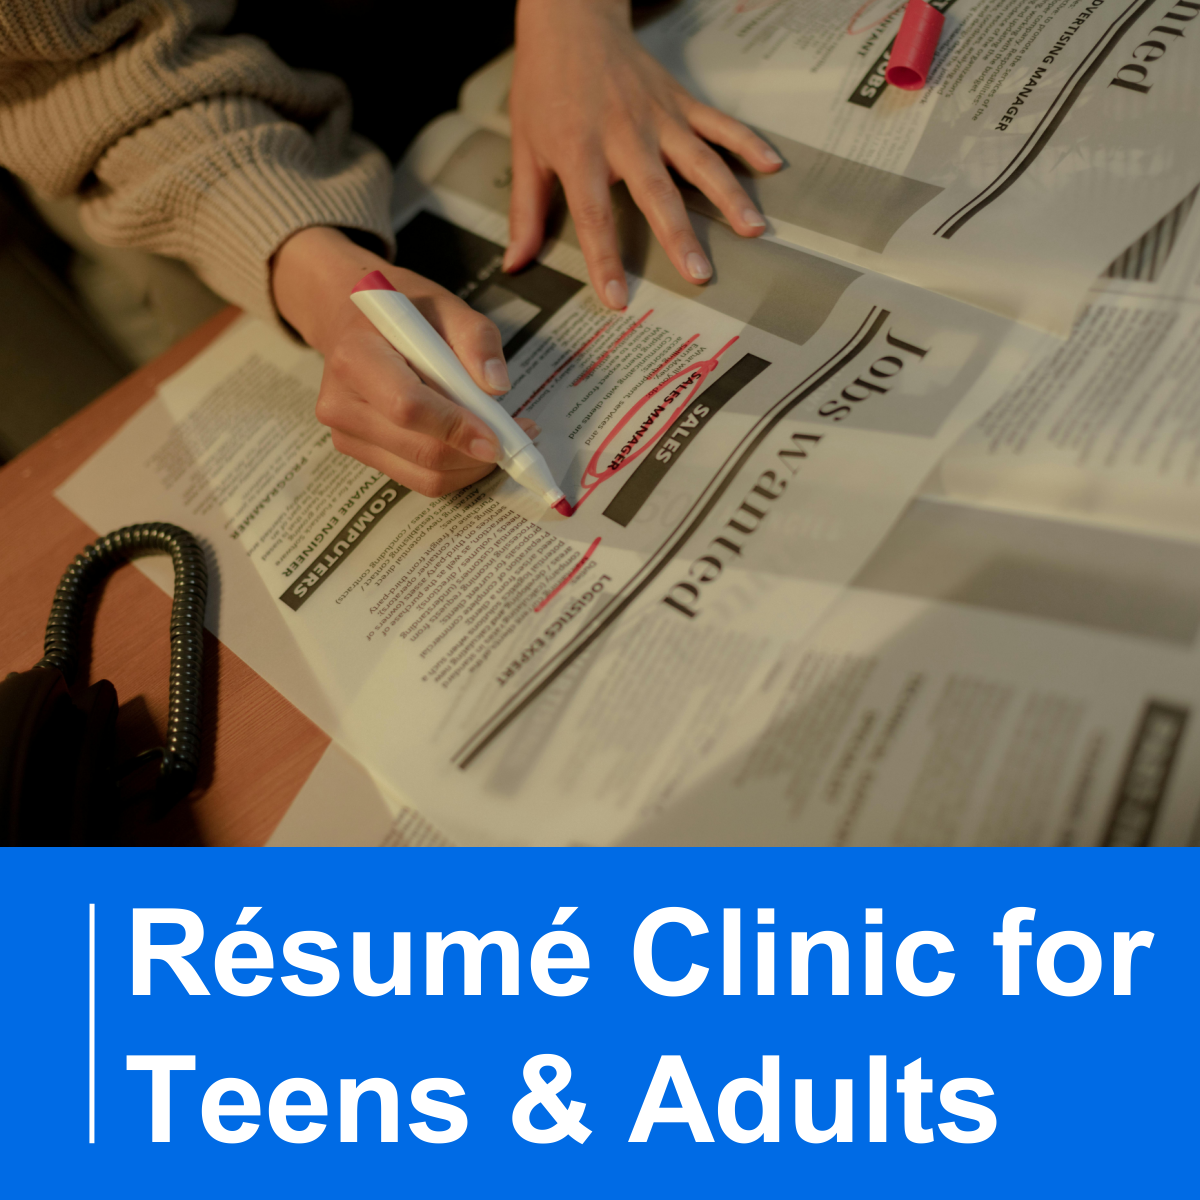 Two hands on a newspaper page, titles Jobs Wanted, with red circles and lines marked on the page. Text reads: Resume Clinic for Teens & Adults.